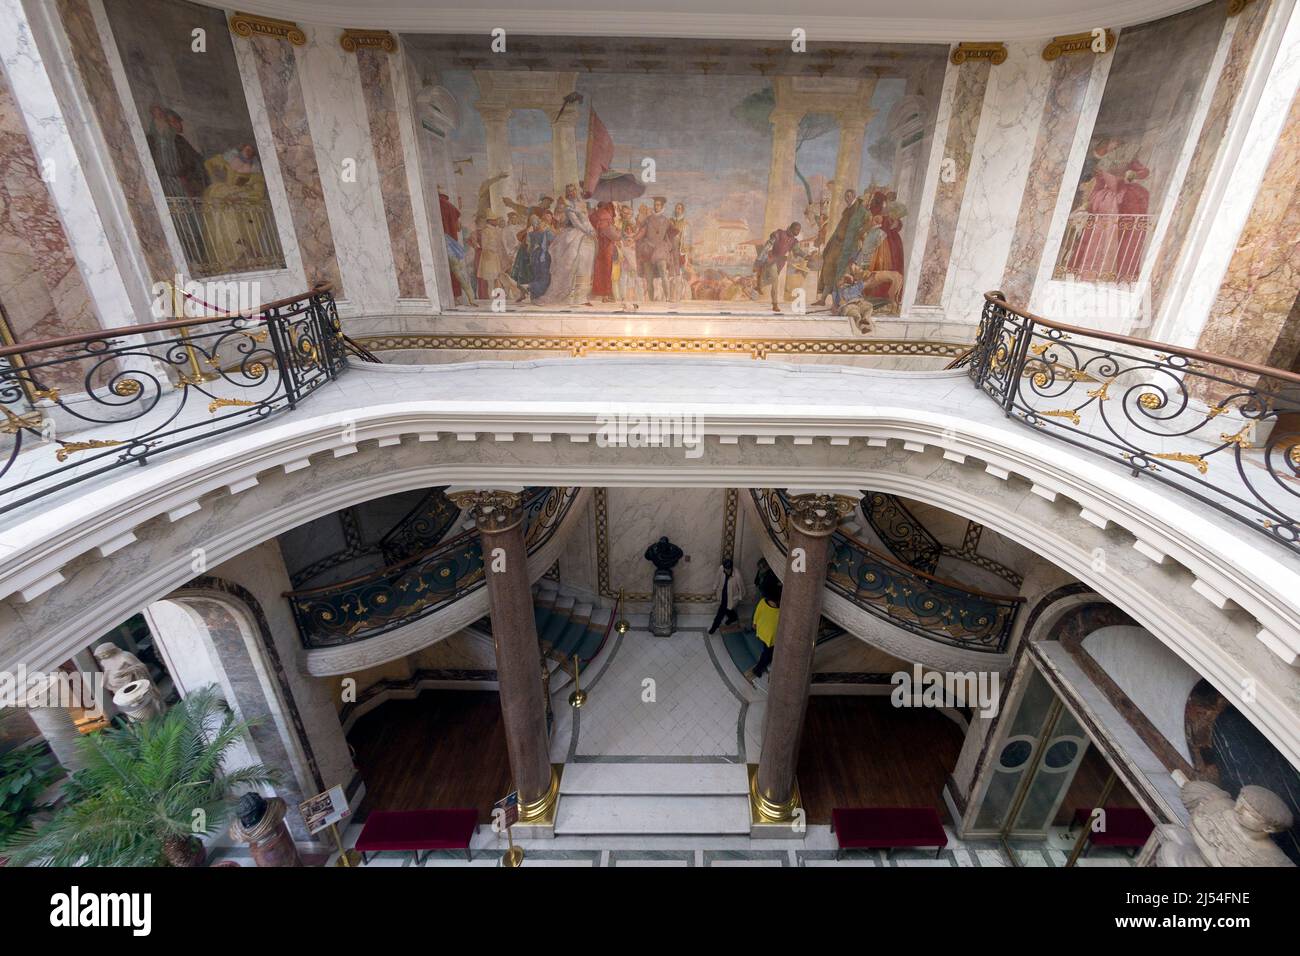 Tiepolo Staircase, Reception of Henry III at the Villa Contarini, by Giambattista Tiepolo, 1745, Musee Jacquemart-Andre, Paris, France, Europe Stock Photo